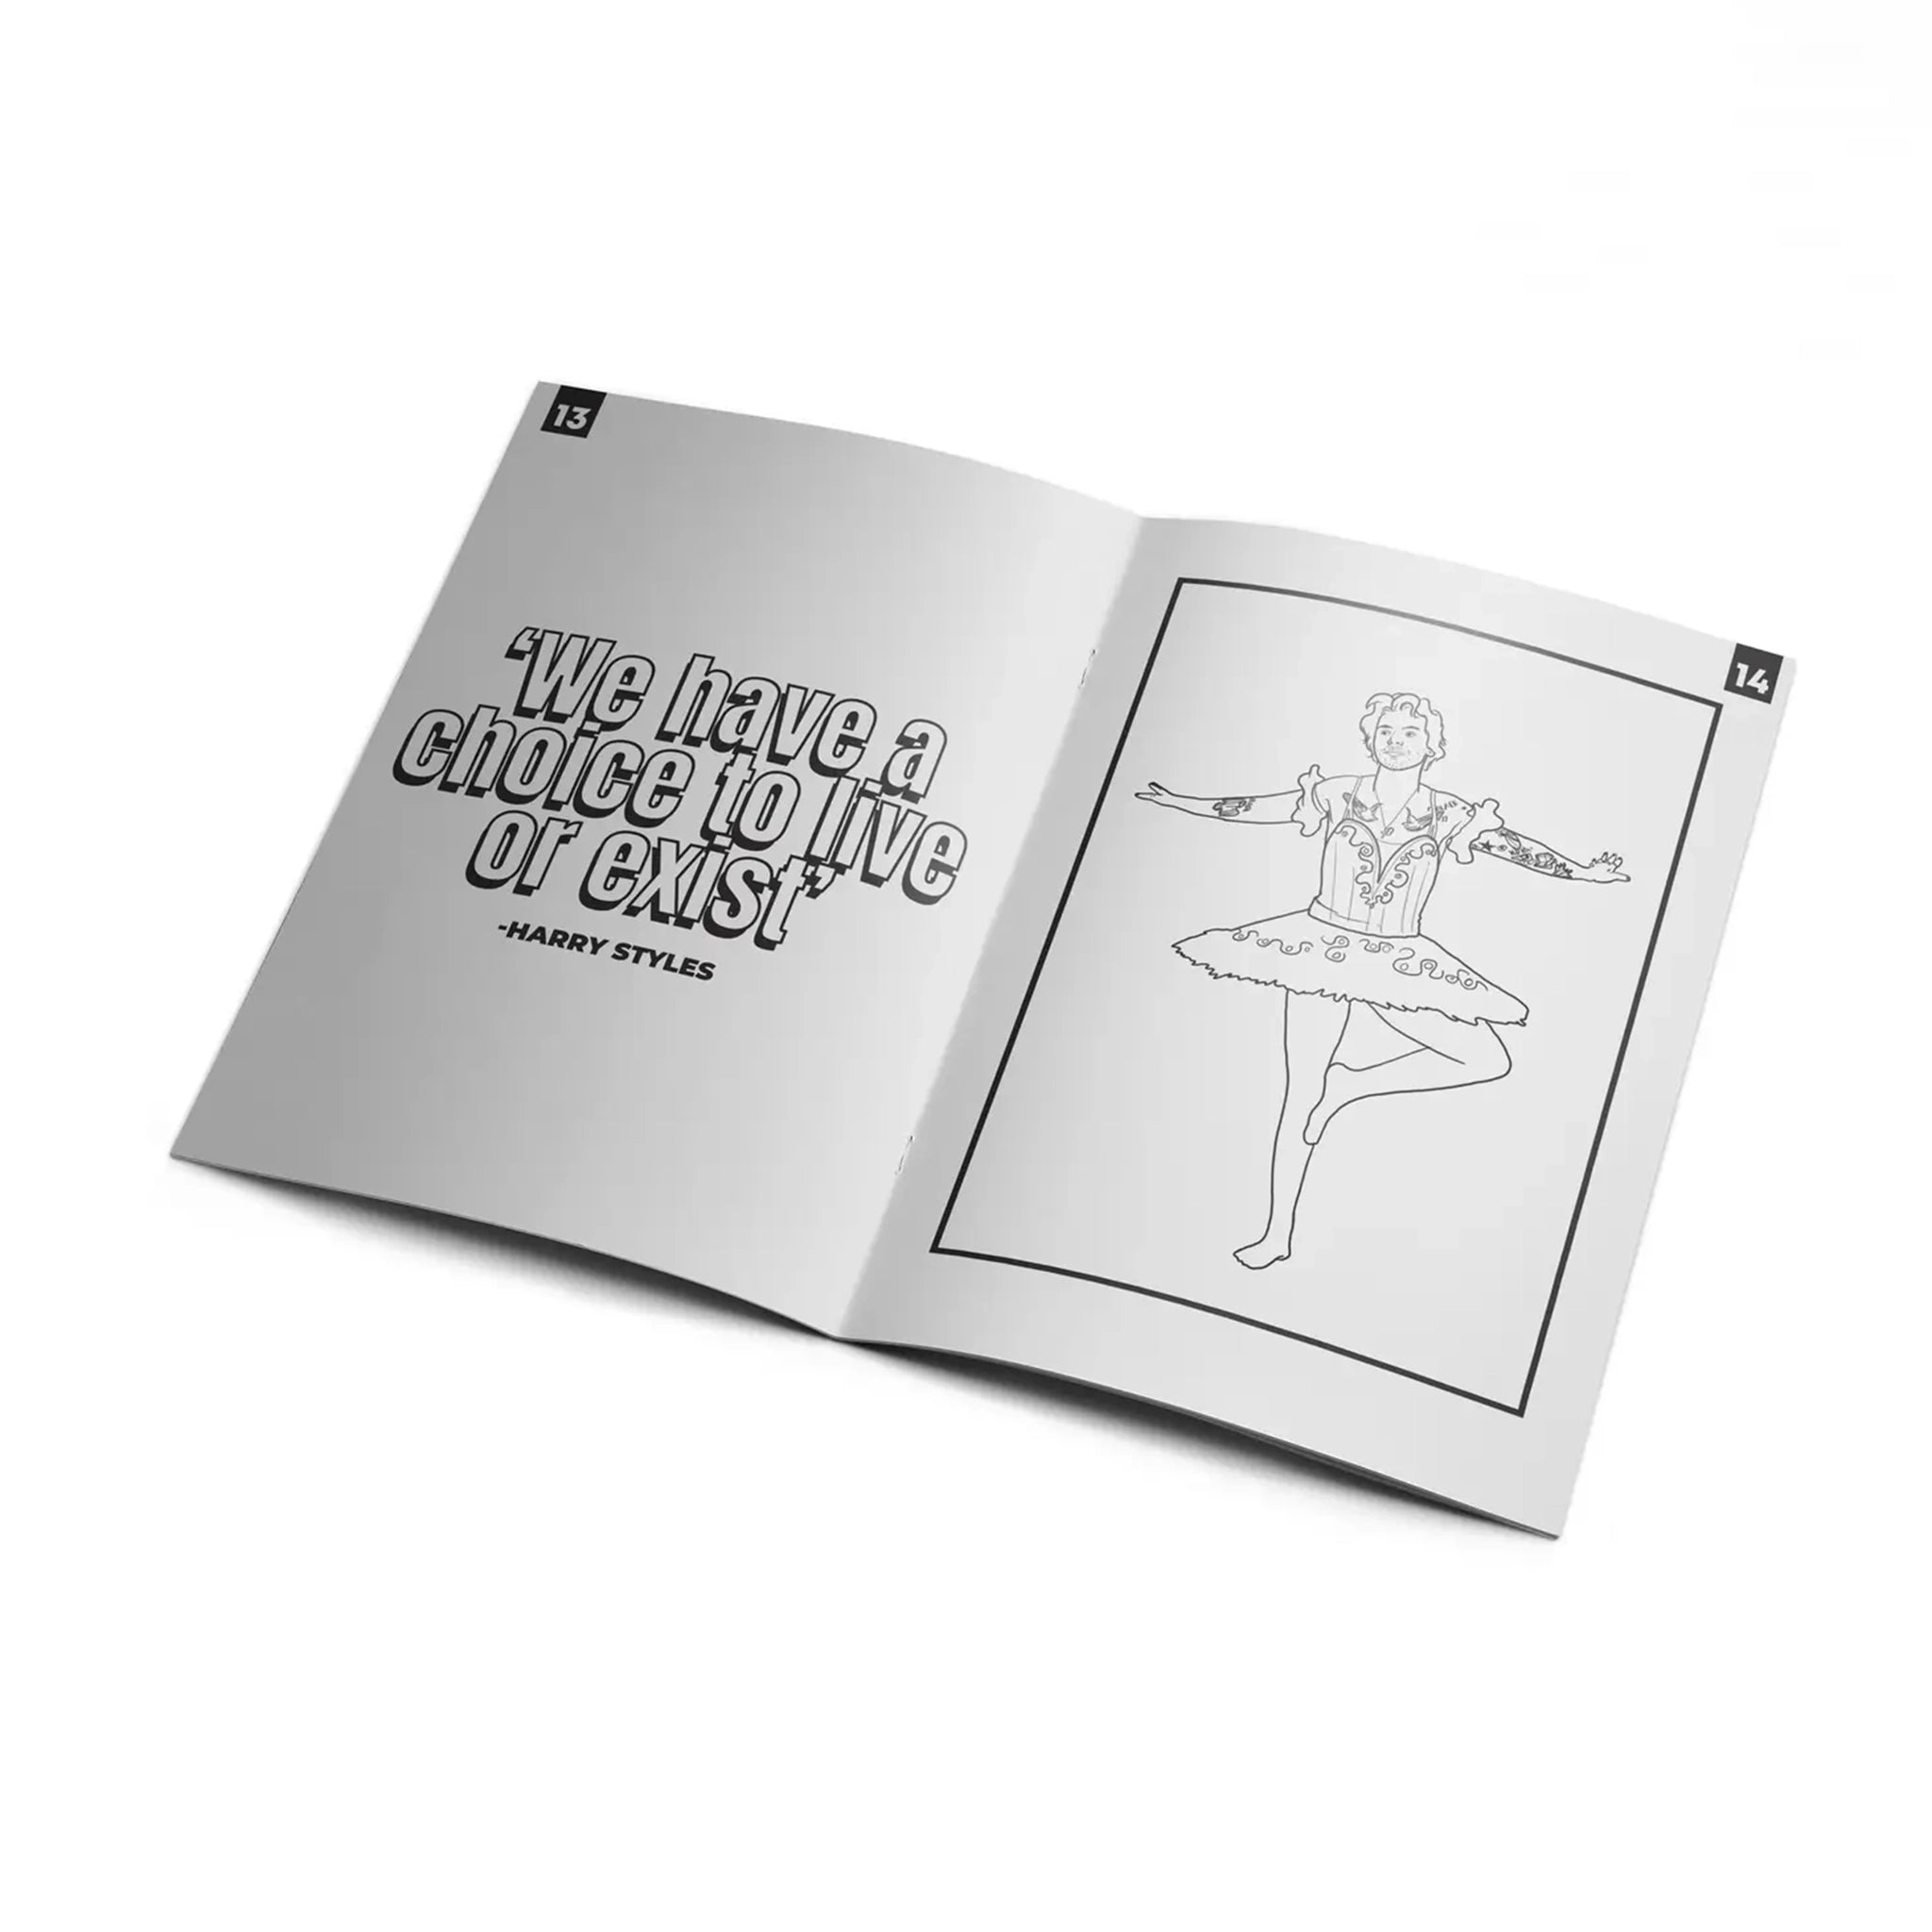 A look inside of the activity book that features quotes and pictures to color inside of the book. This quote reads, &quot;We have a choice to live or exist&quot; along with a illustration of harry in his iconic ballerina outfit.